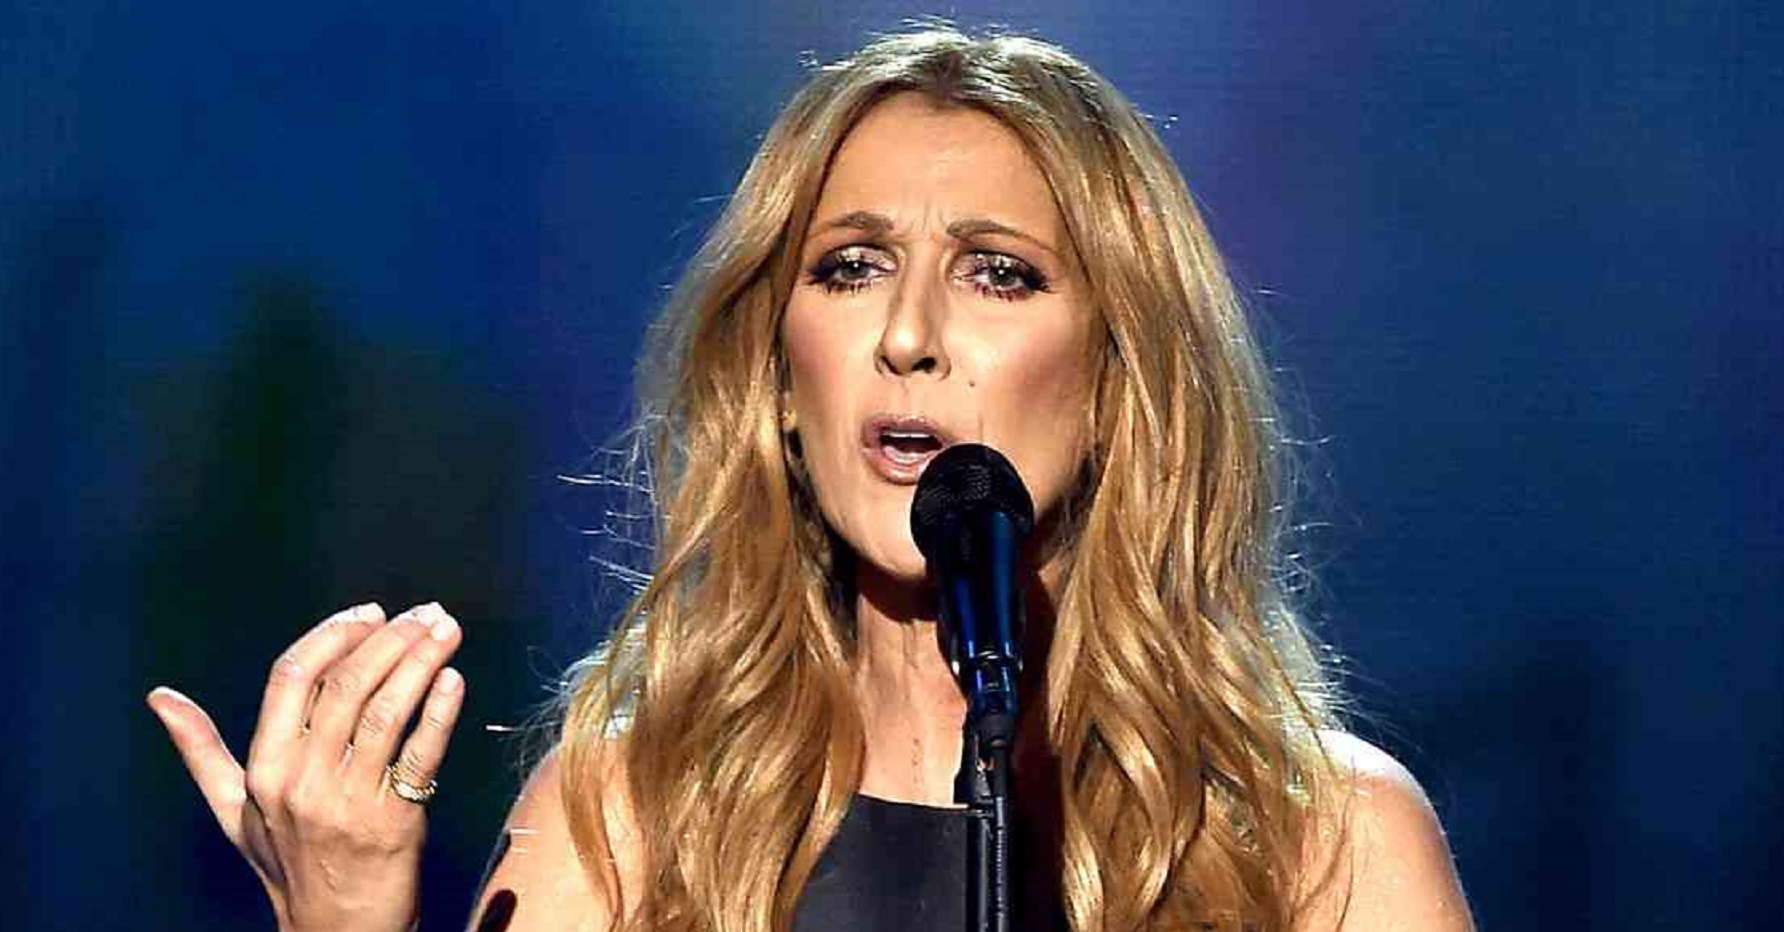 Top 10 Best Songs of Celine Dion – From ‘All By Myself’ to ‘My Heart Will Go On’